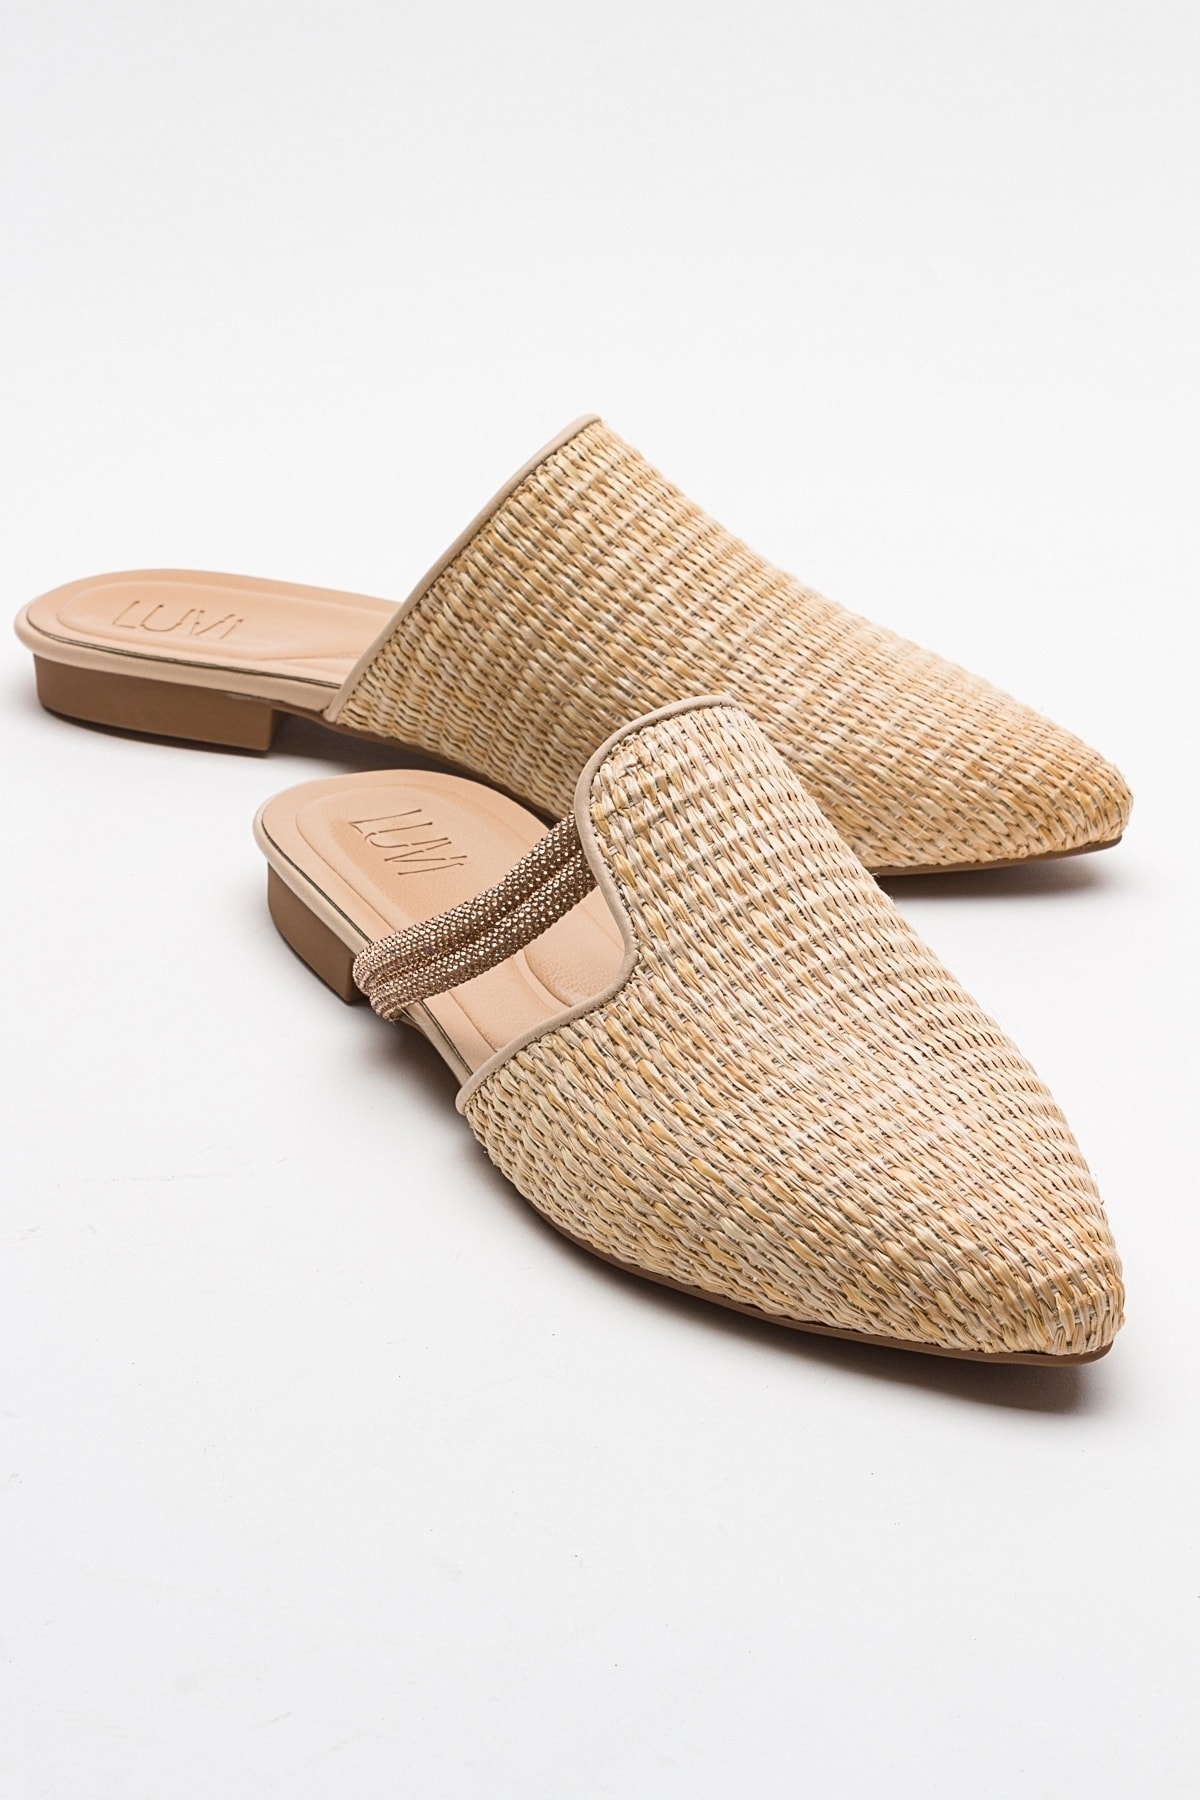 Levně LuviShoes PESA Cream Women's Slippers with Straw Stones.